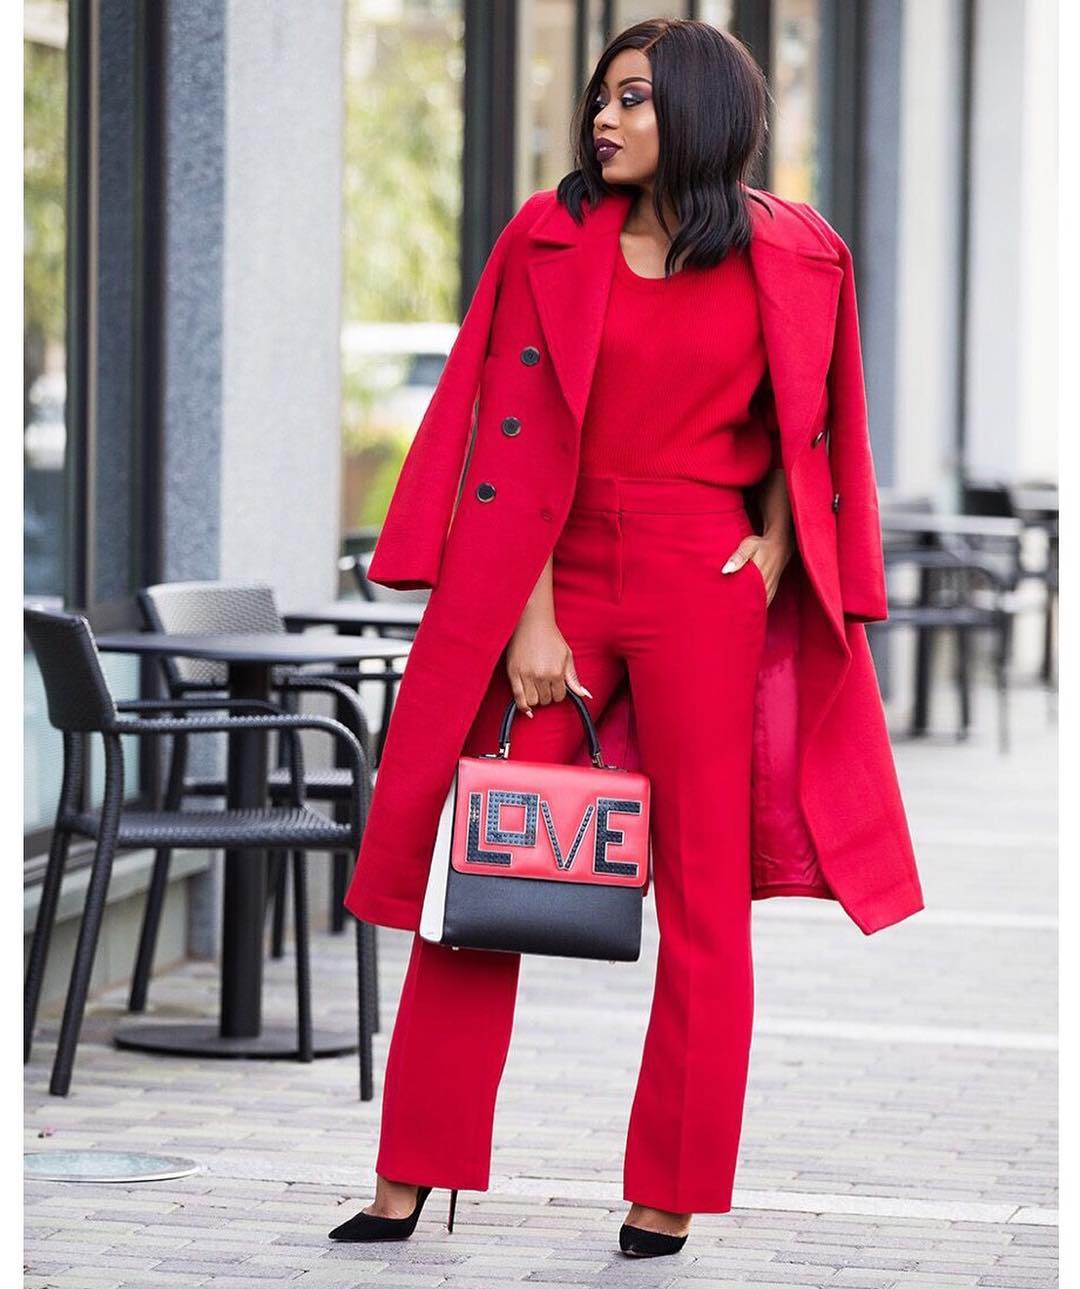 How To Wear Red In 2018 - According to Your Favourite Bloggers and ...